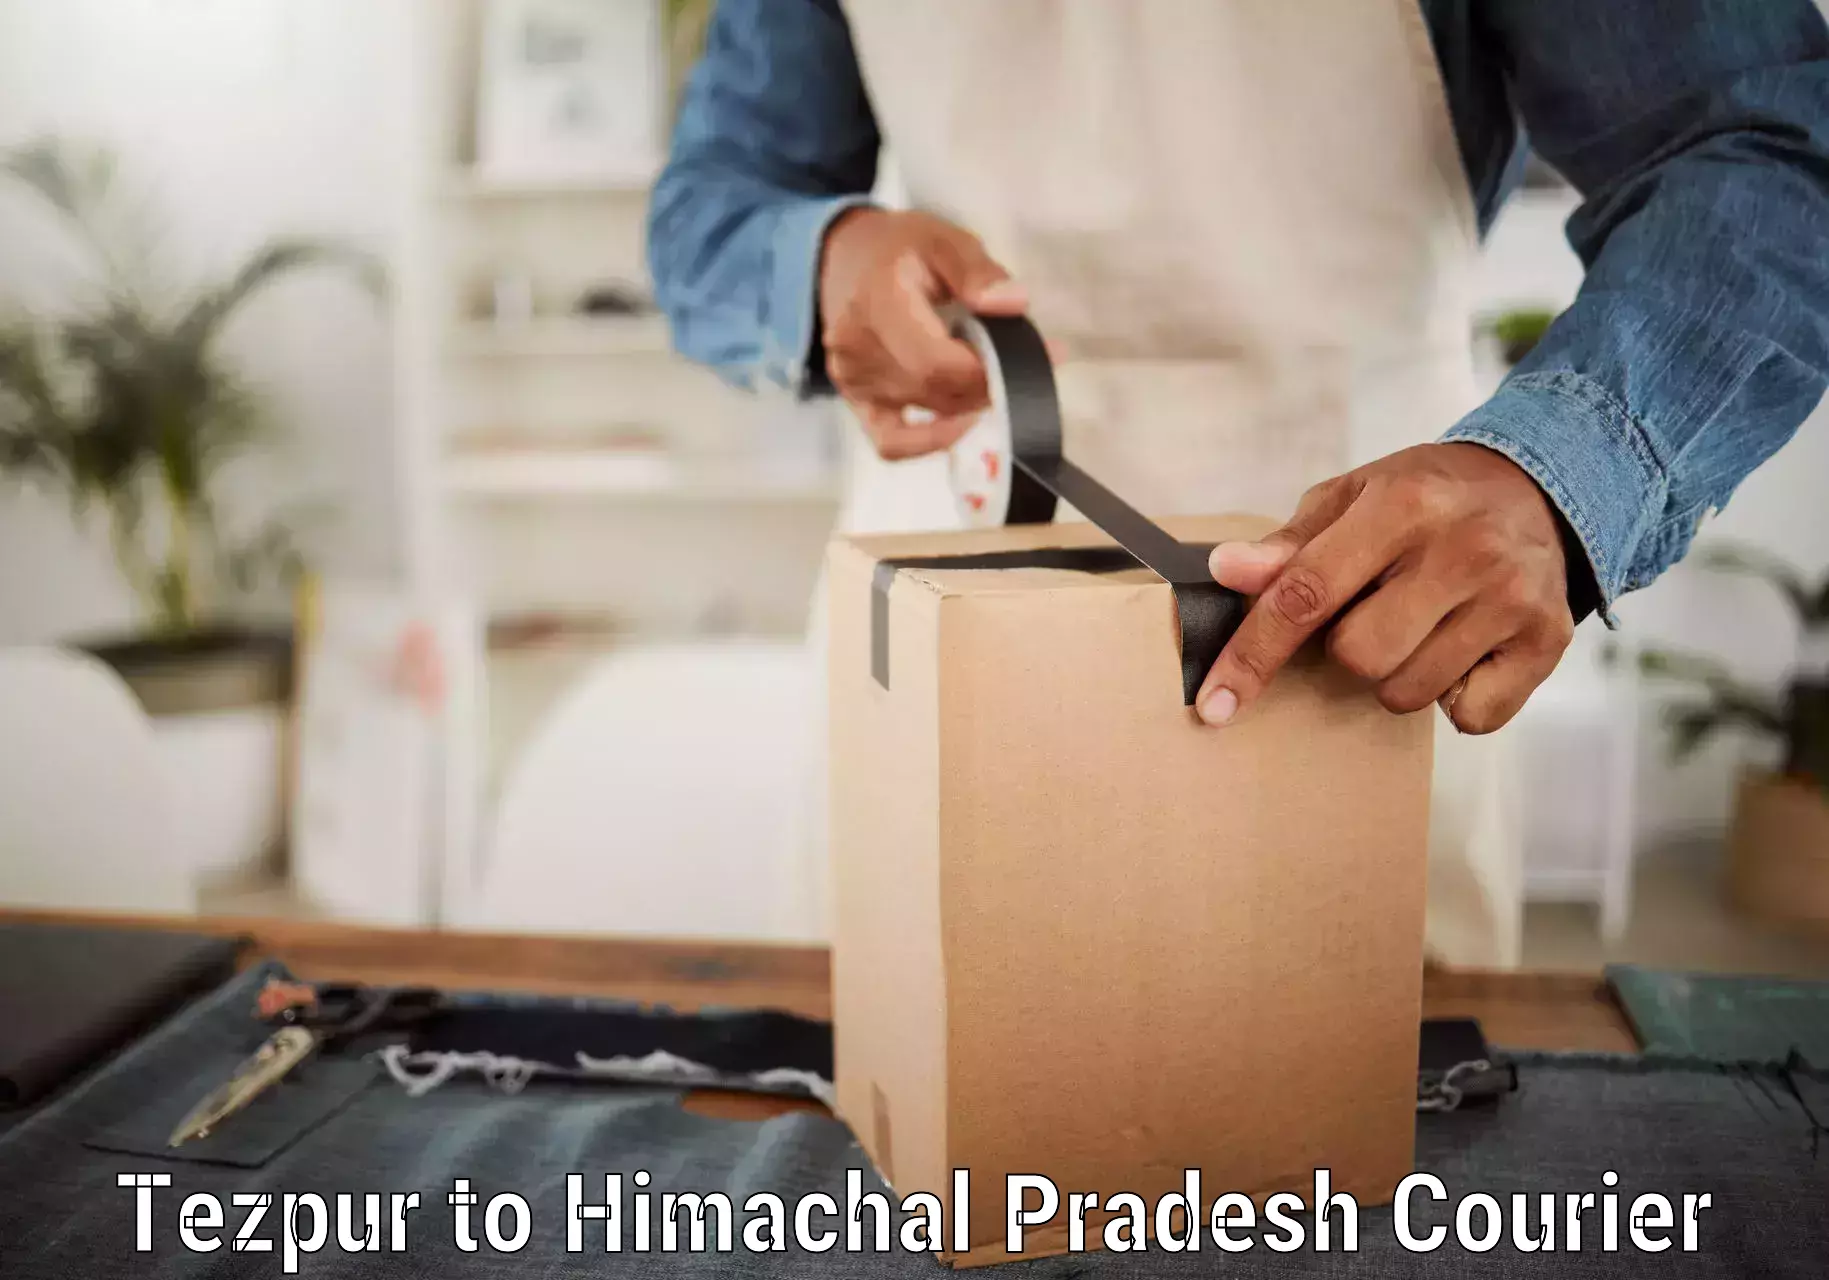 On-call courier service Tezpur to Himachal Pradesh